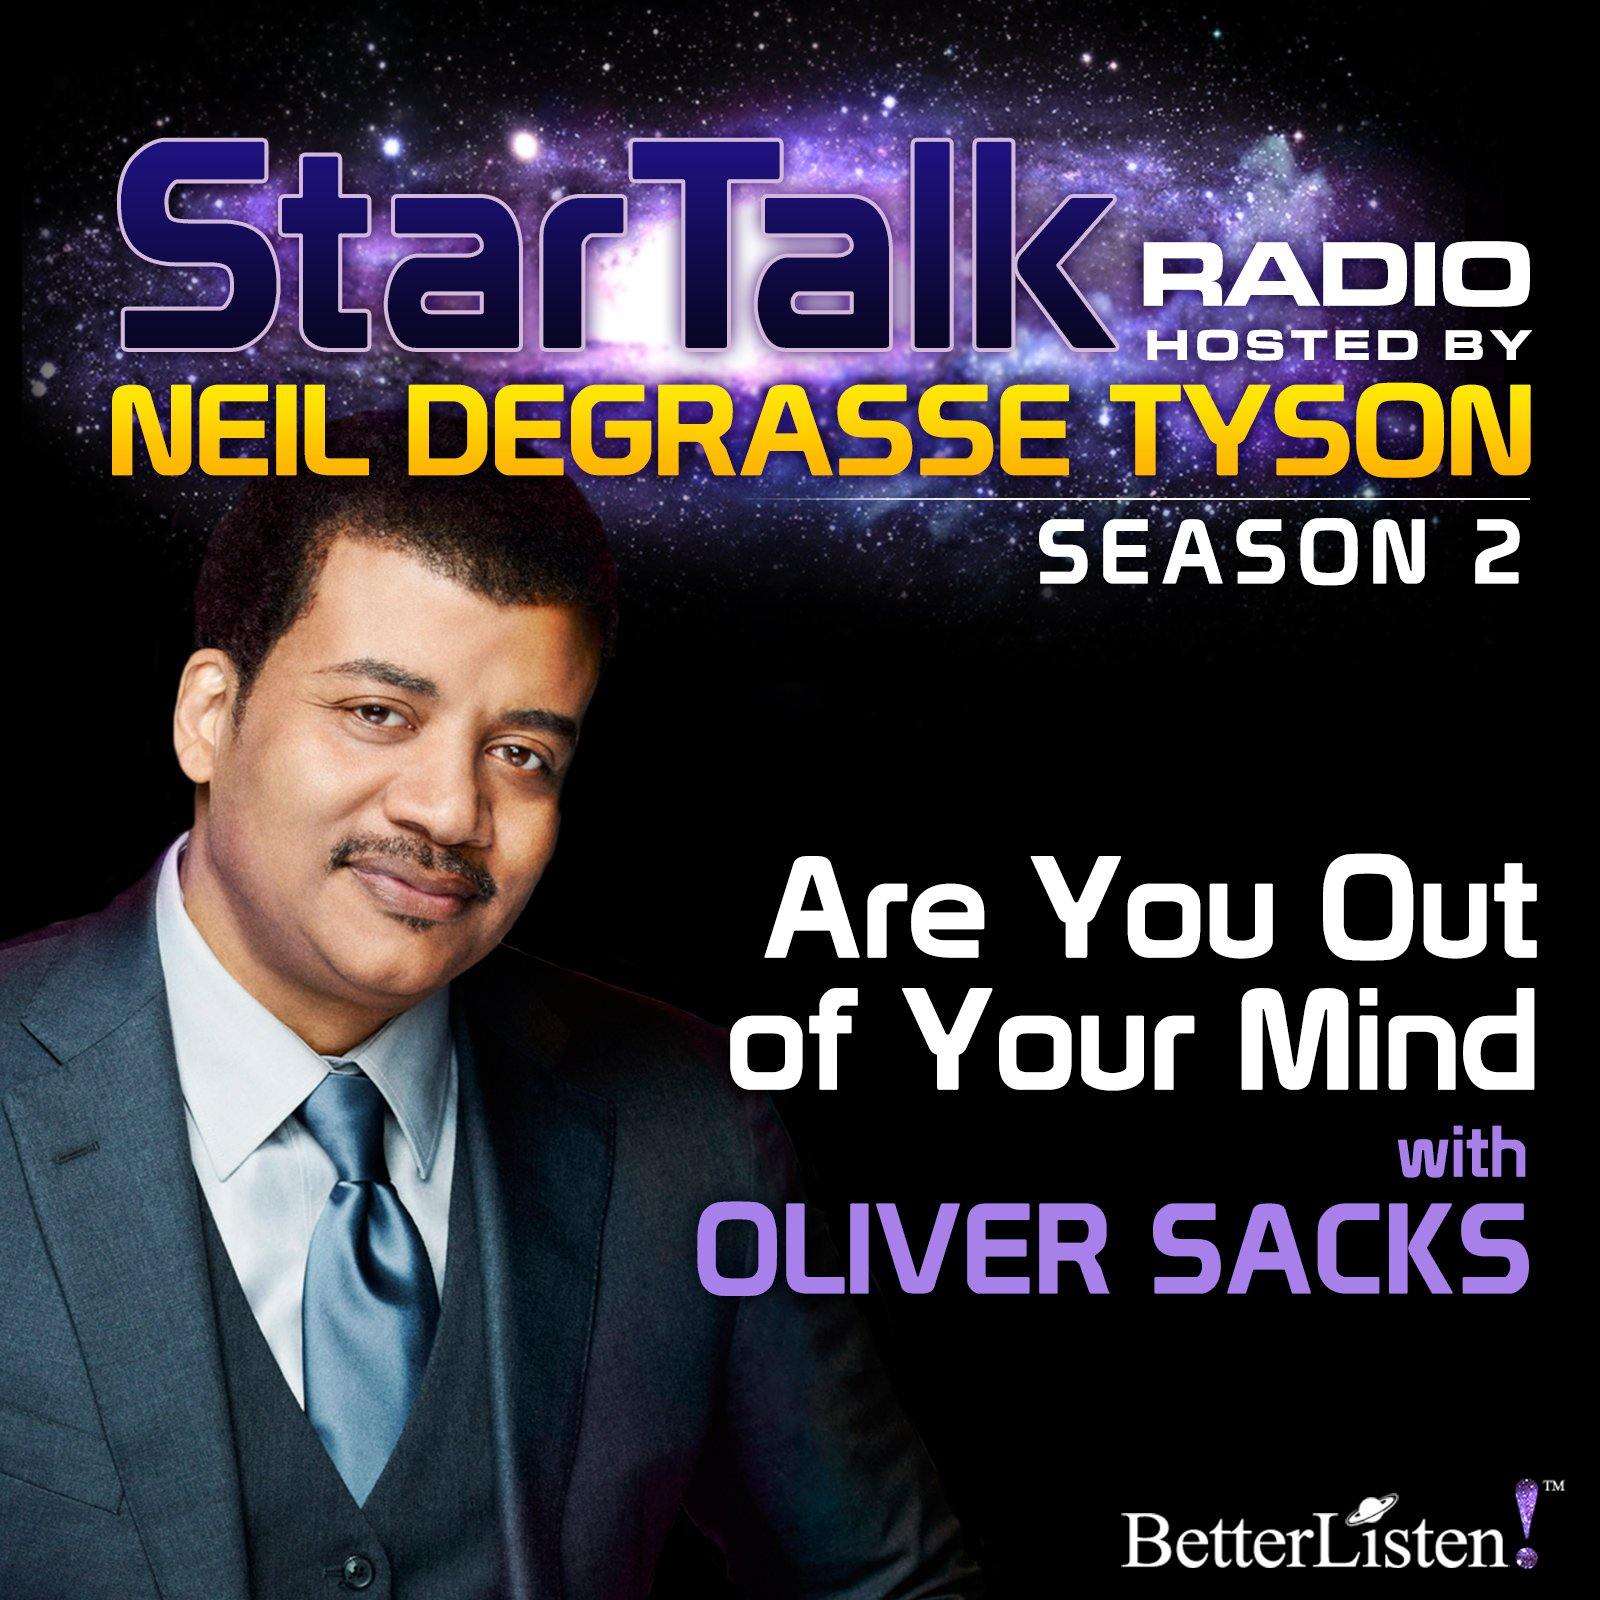 Are You Out of Your Mind with Neil deGrasse Tyson Audio Program StarTalk - BetterListen!